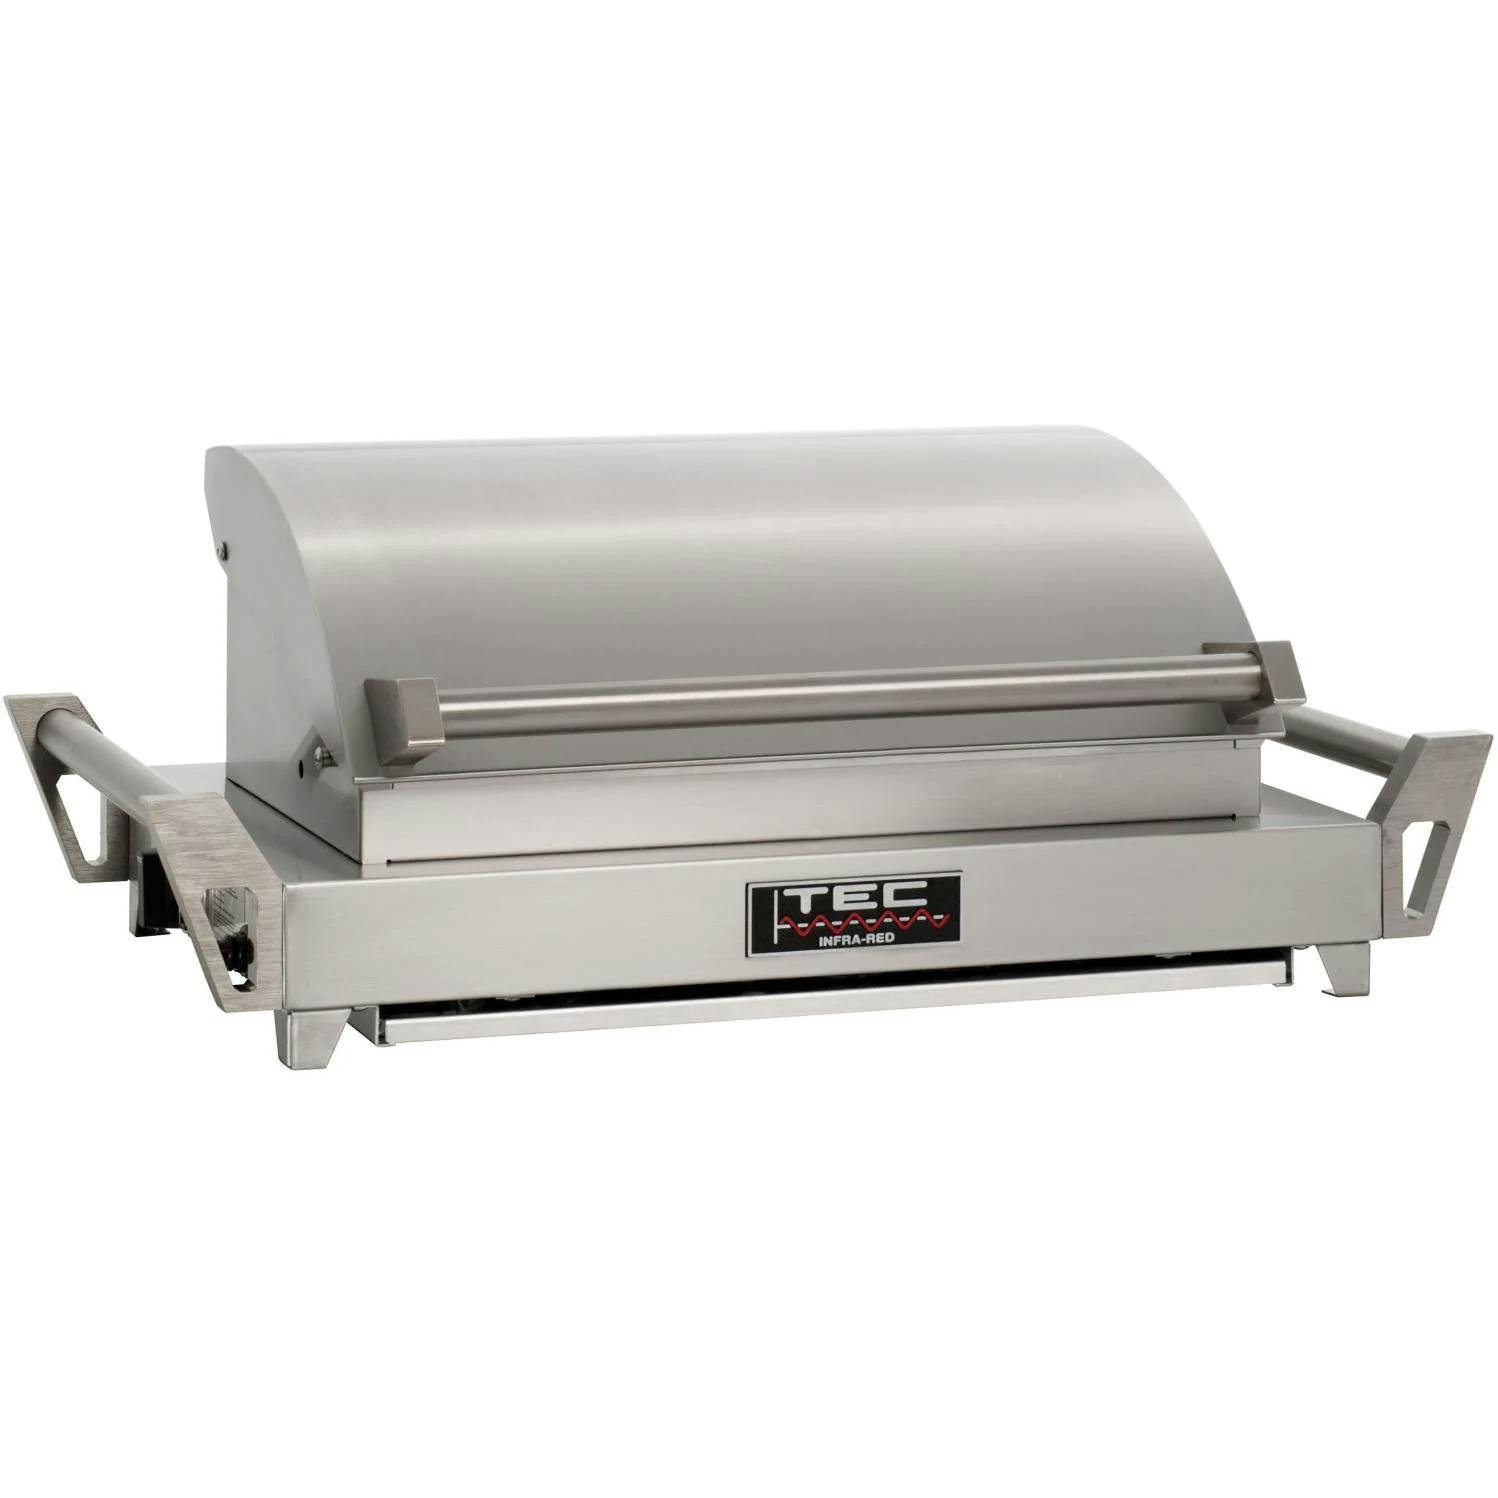 TEC G-Sport FR Portable Infrared Grill · 30 in. · Natural Gas